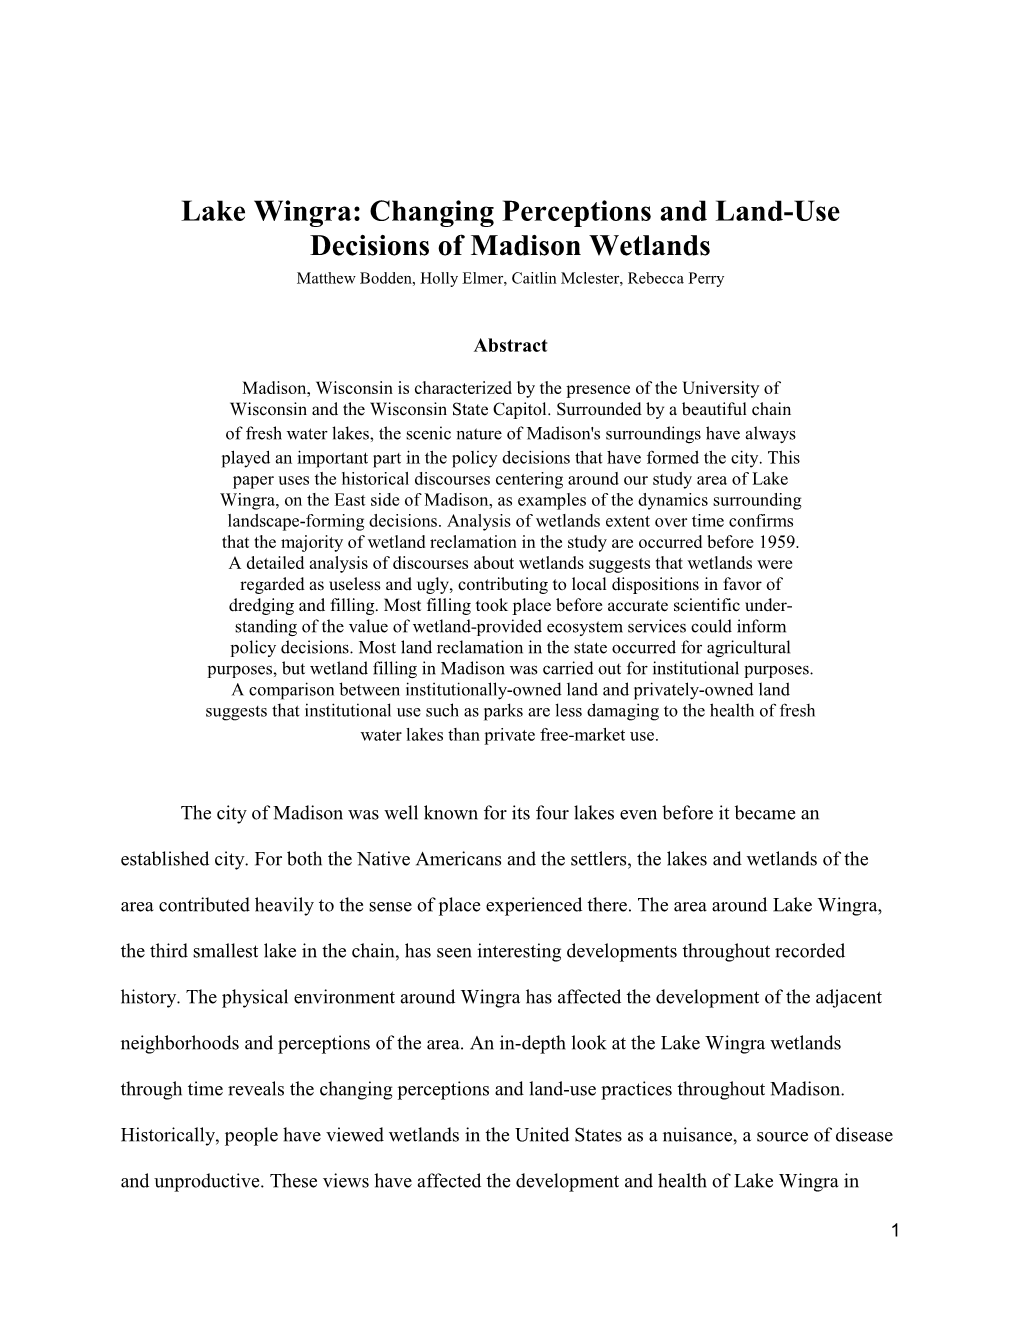 Lake Wingra: Changing Perceptions and Land-Use Decisions of Madison Wetlands Matthew Bodden, Holly Elmer, Caitlin Mclester, Rebecca Perry